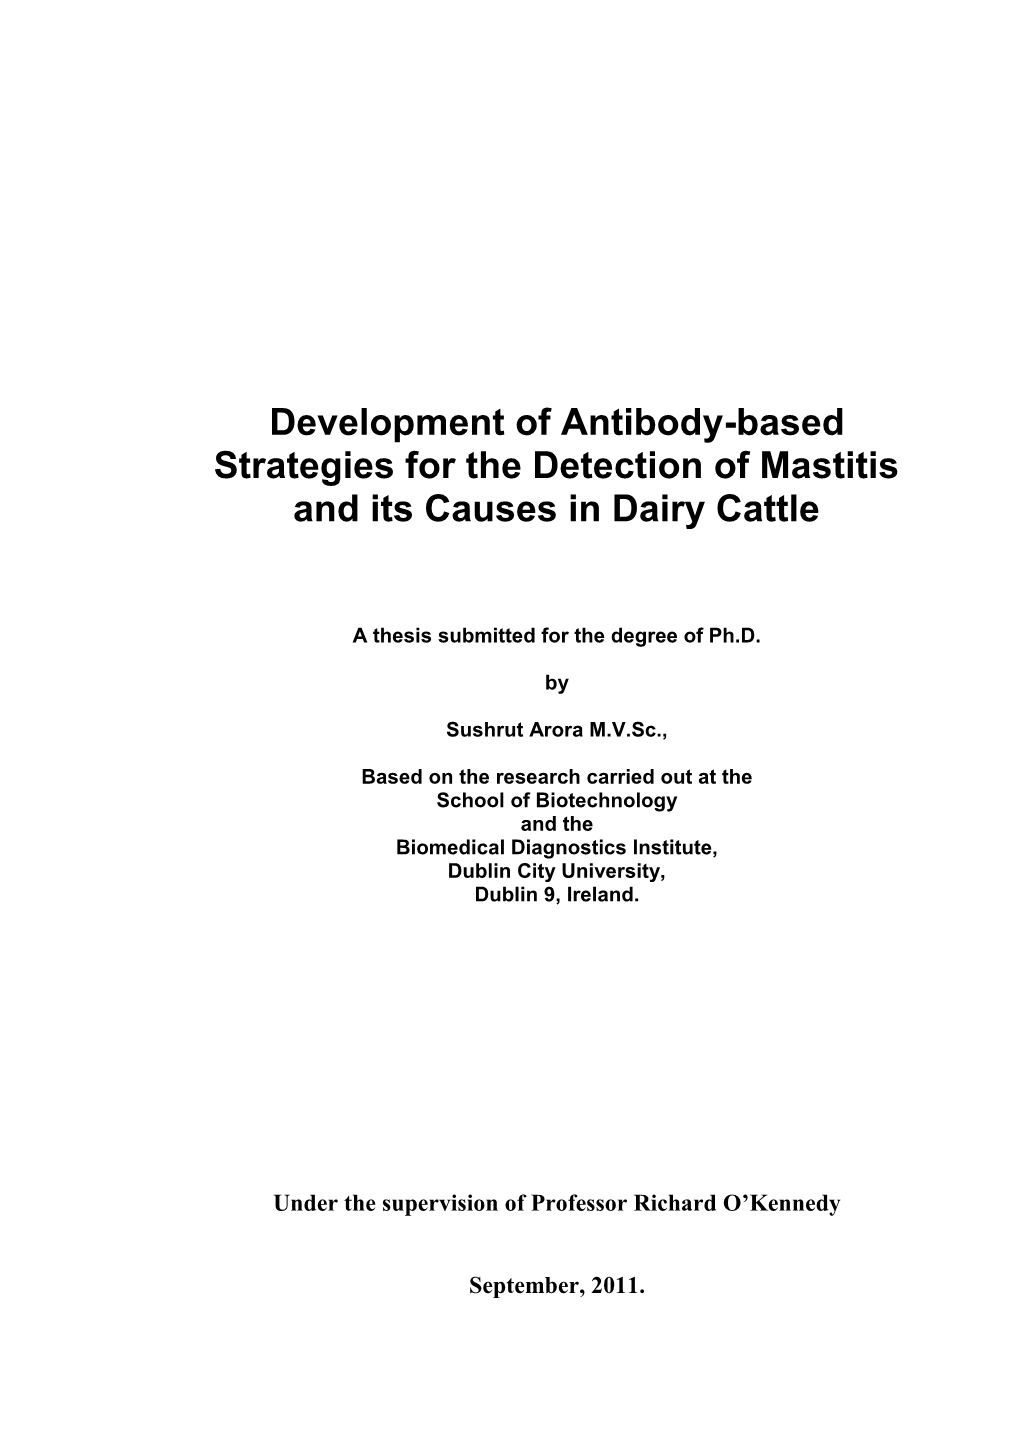 Development of Antibody-Based Strategies for the Detection of Mastitis and Its Causes in Dairy Cattle